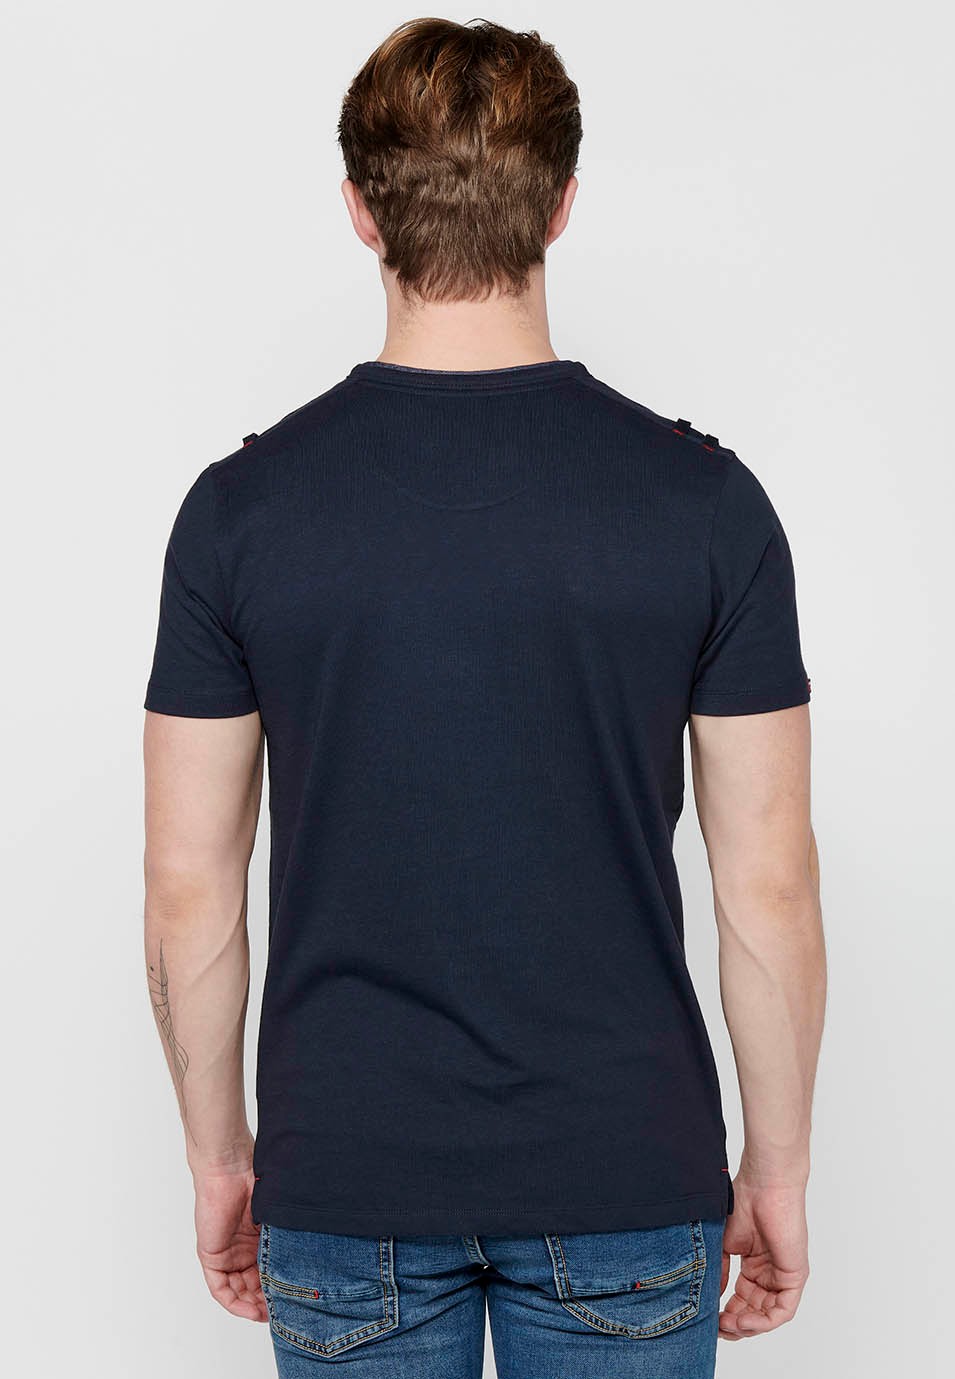 Navy Color Short Sleeve Cotton T-shirt with Round Neck with Buttoned Opening for Men 2